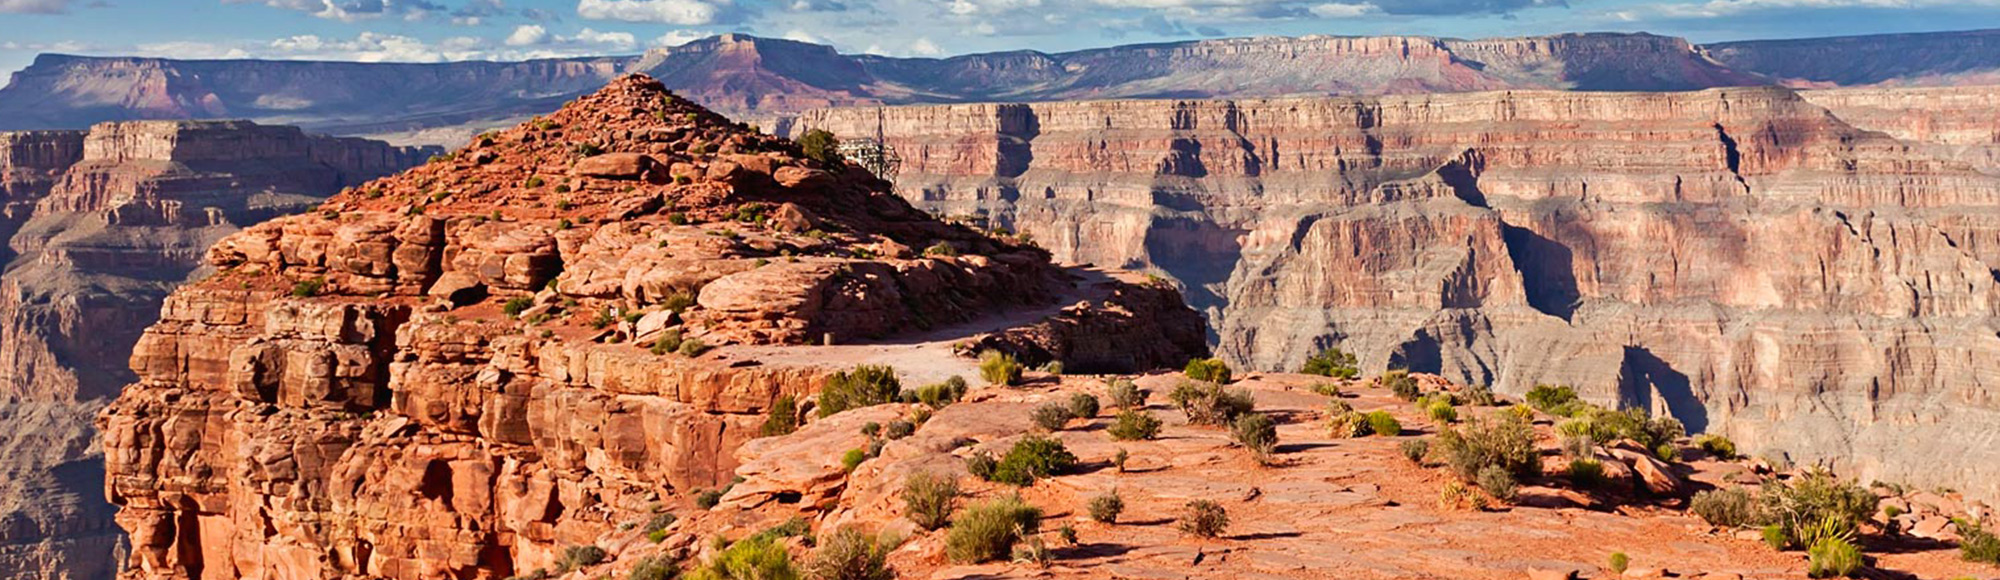 Grand Canyon Experience tour